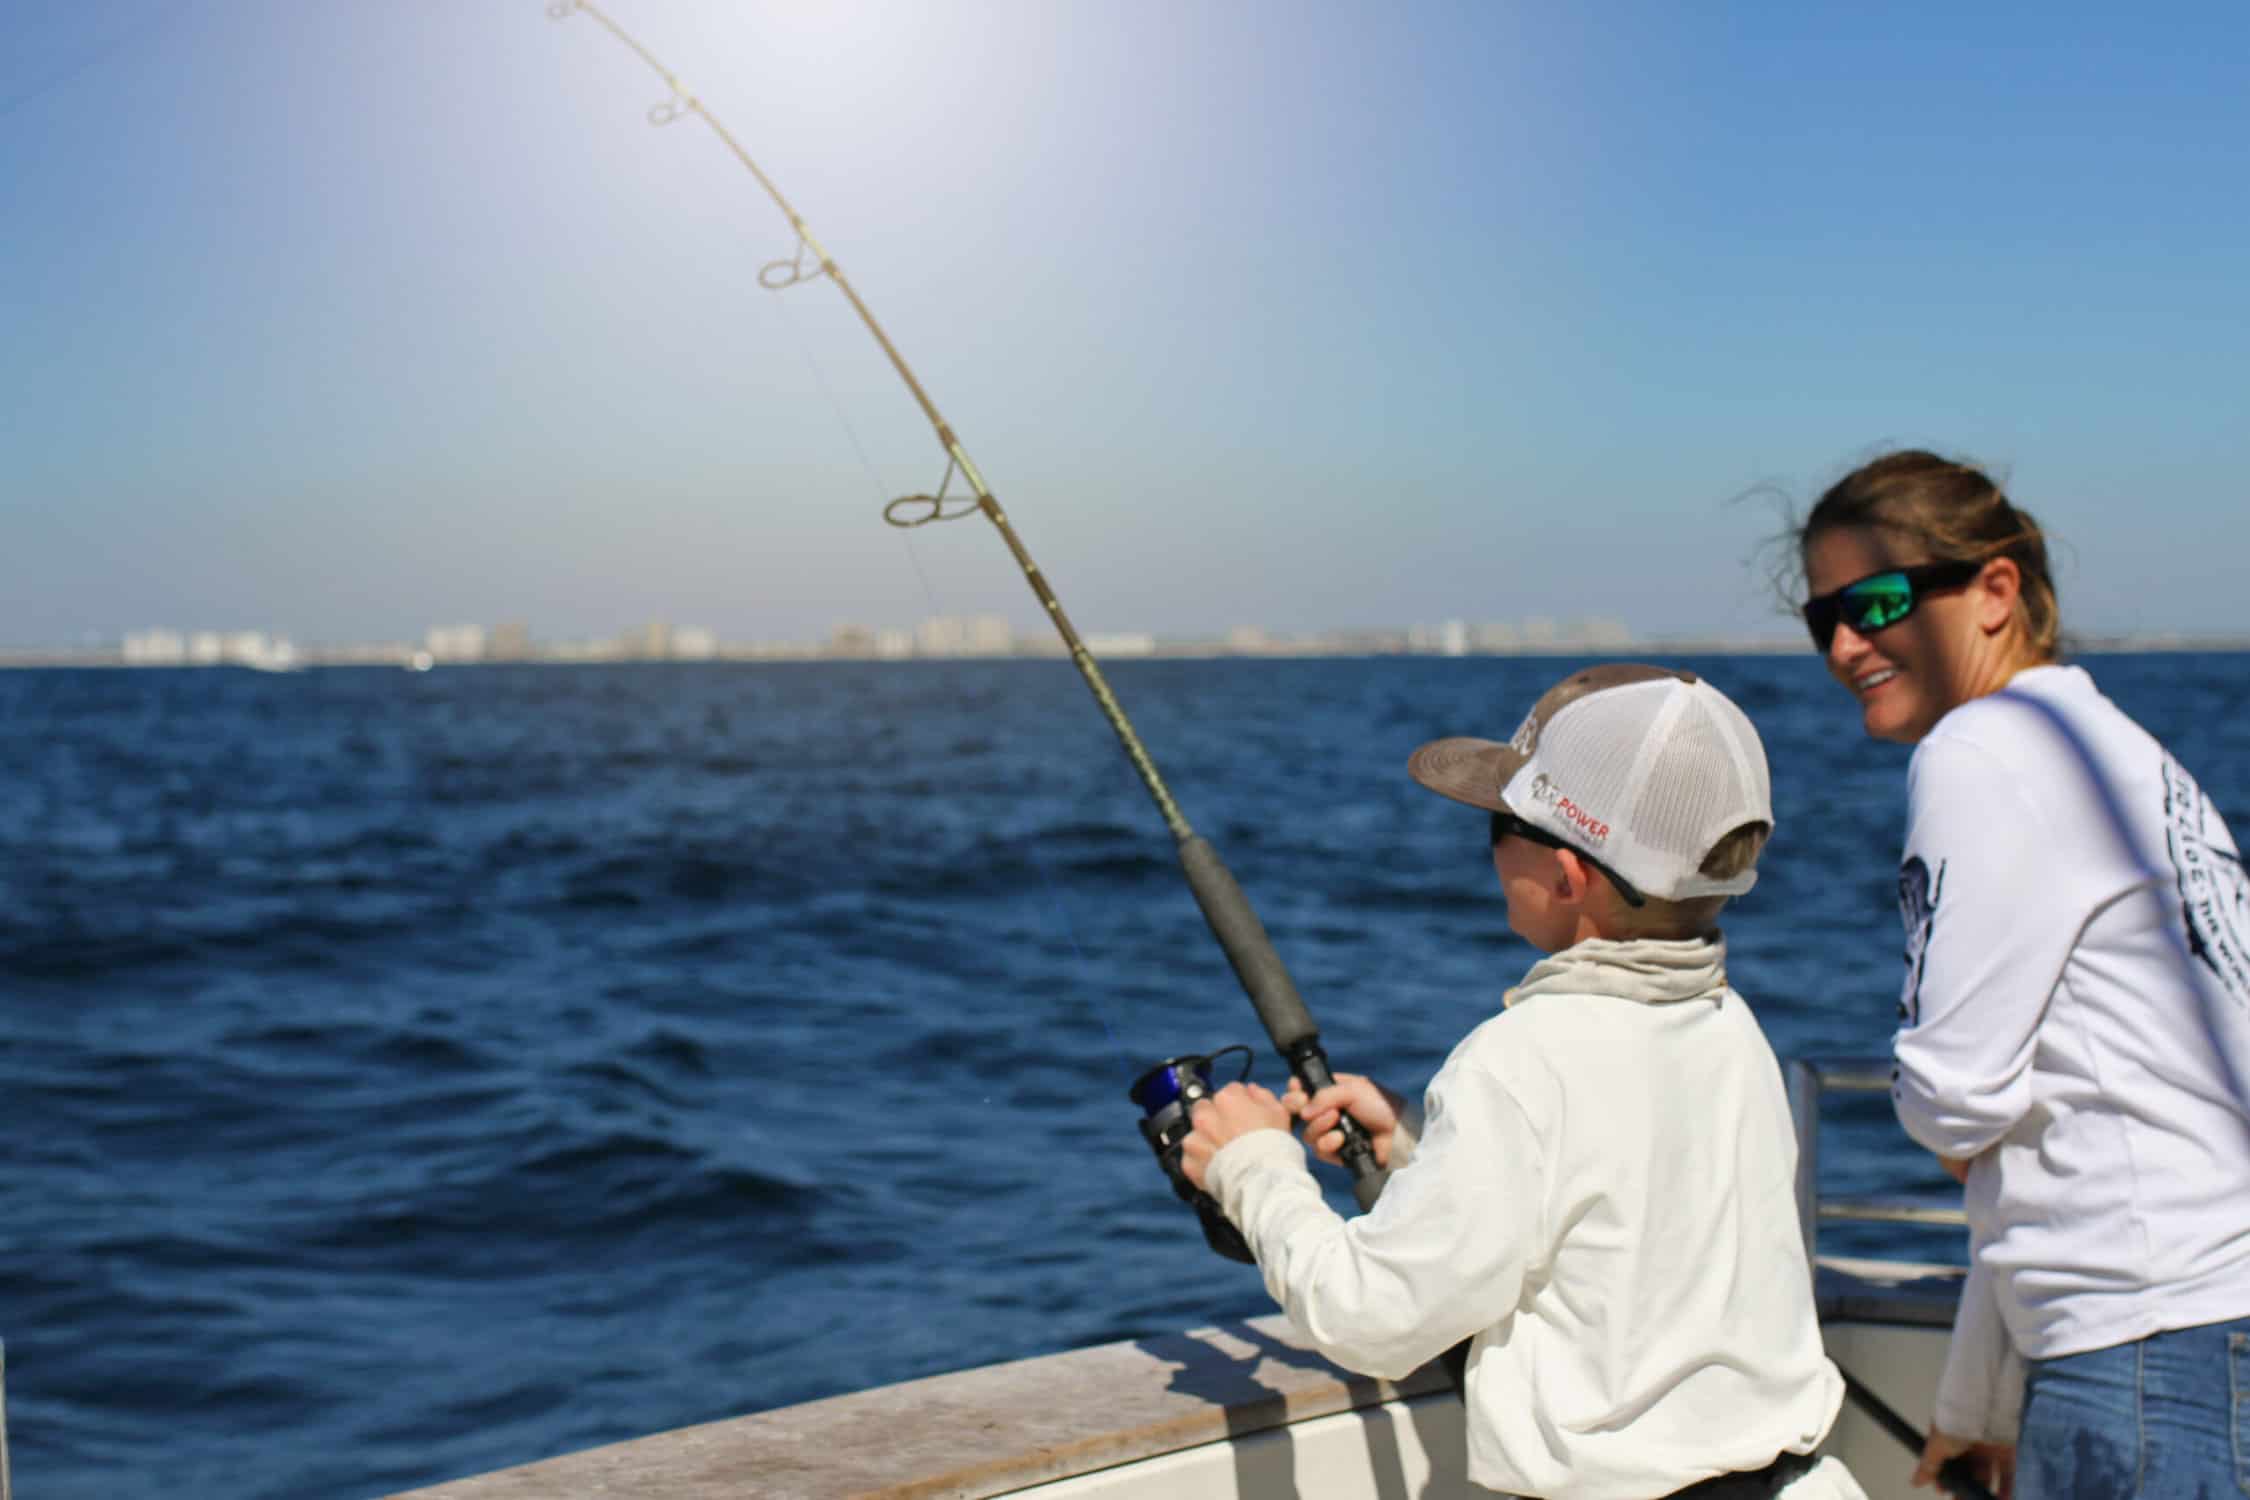 deep sea fishing with kids - how to choose the right captain for your crew - destin florida